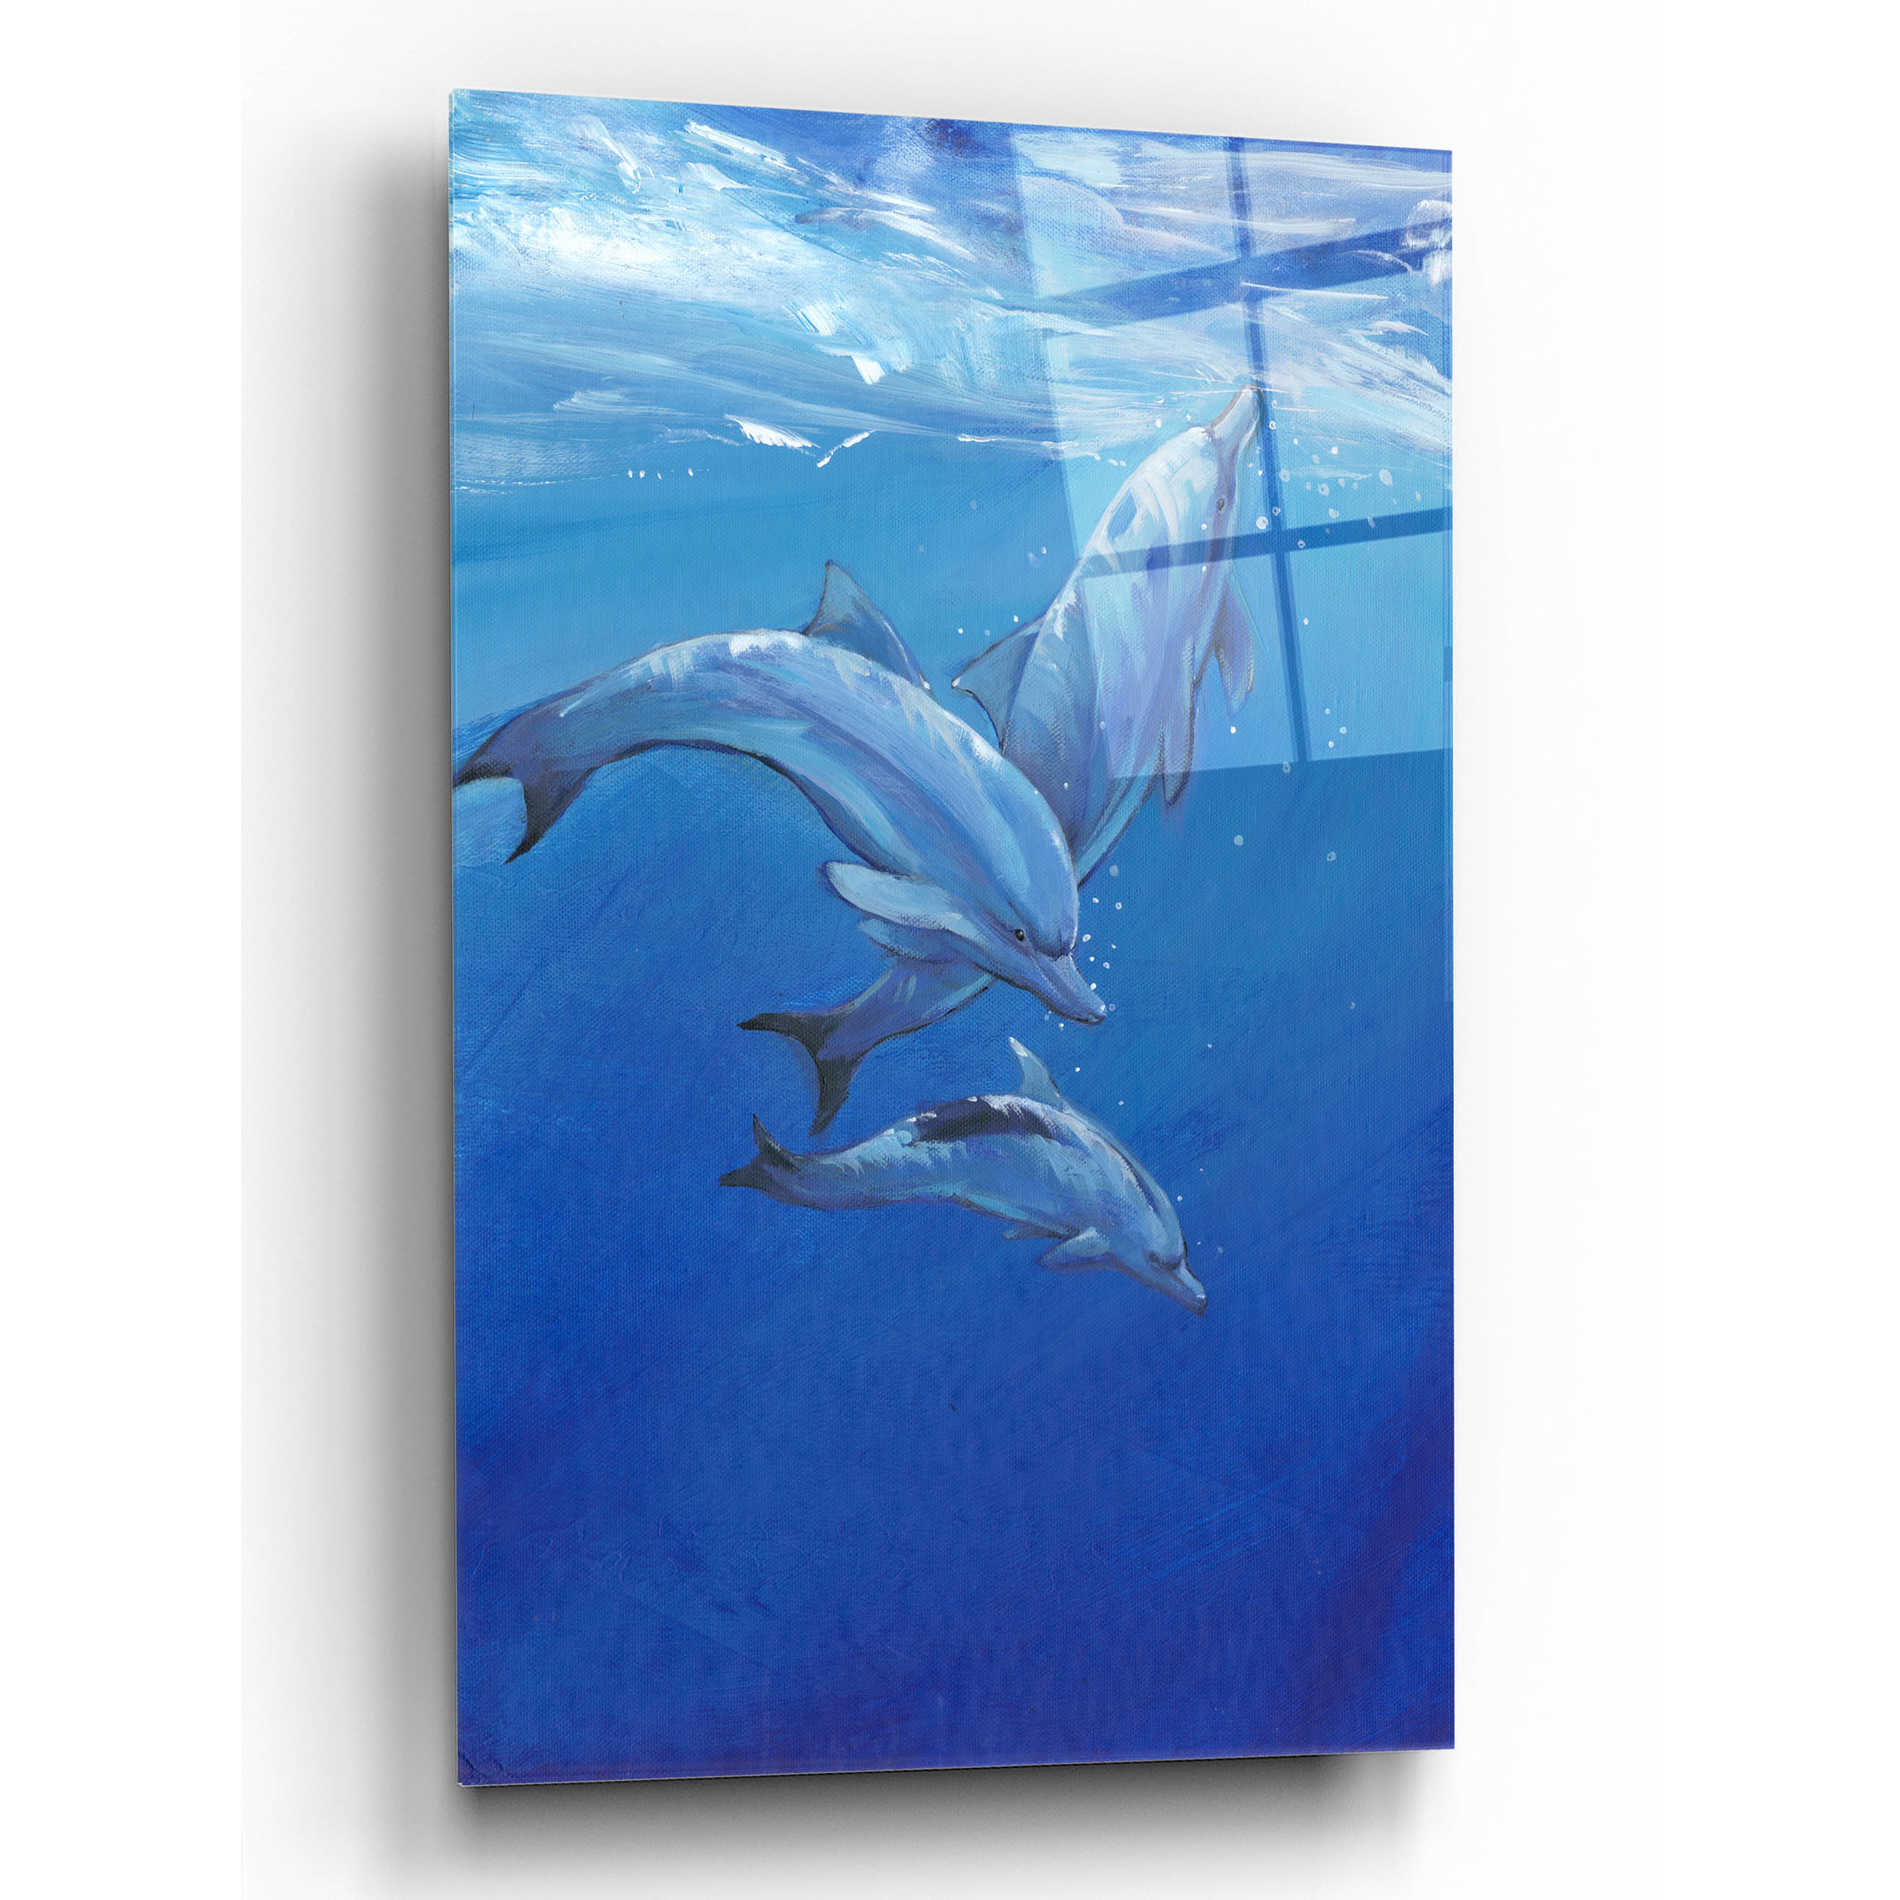 Epic Art 'Under Sea Dolphins' by Tim O'Toole, Acrylic Glass Wall Art,12x16